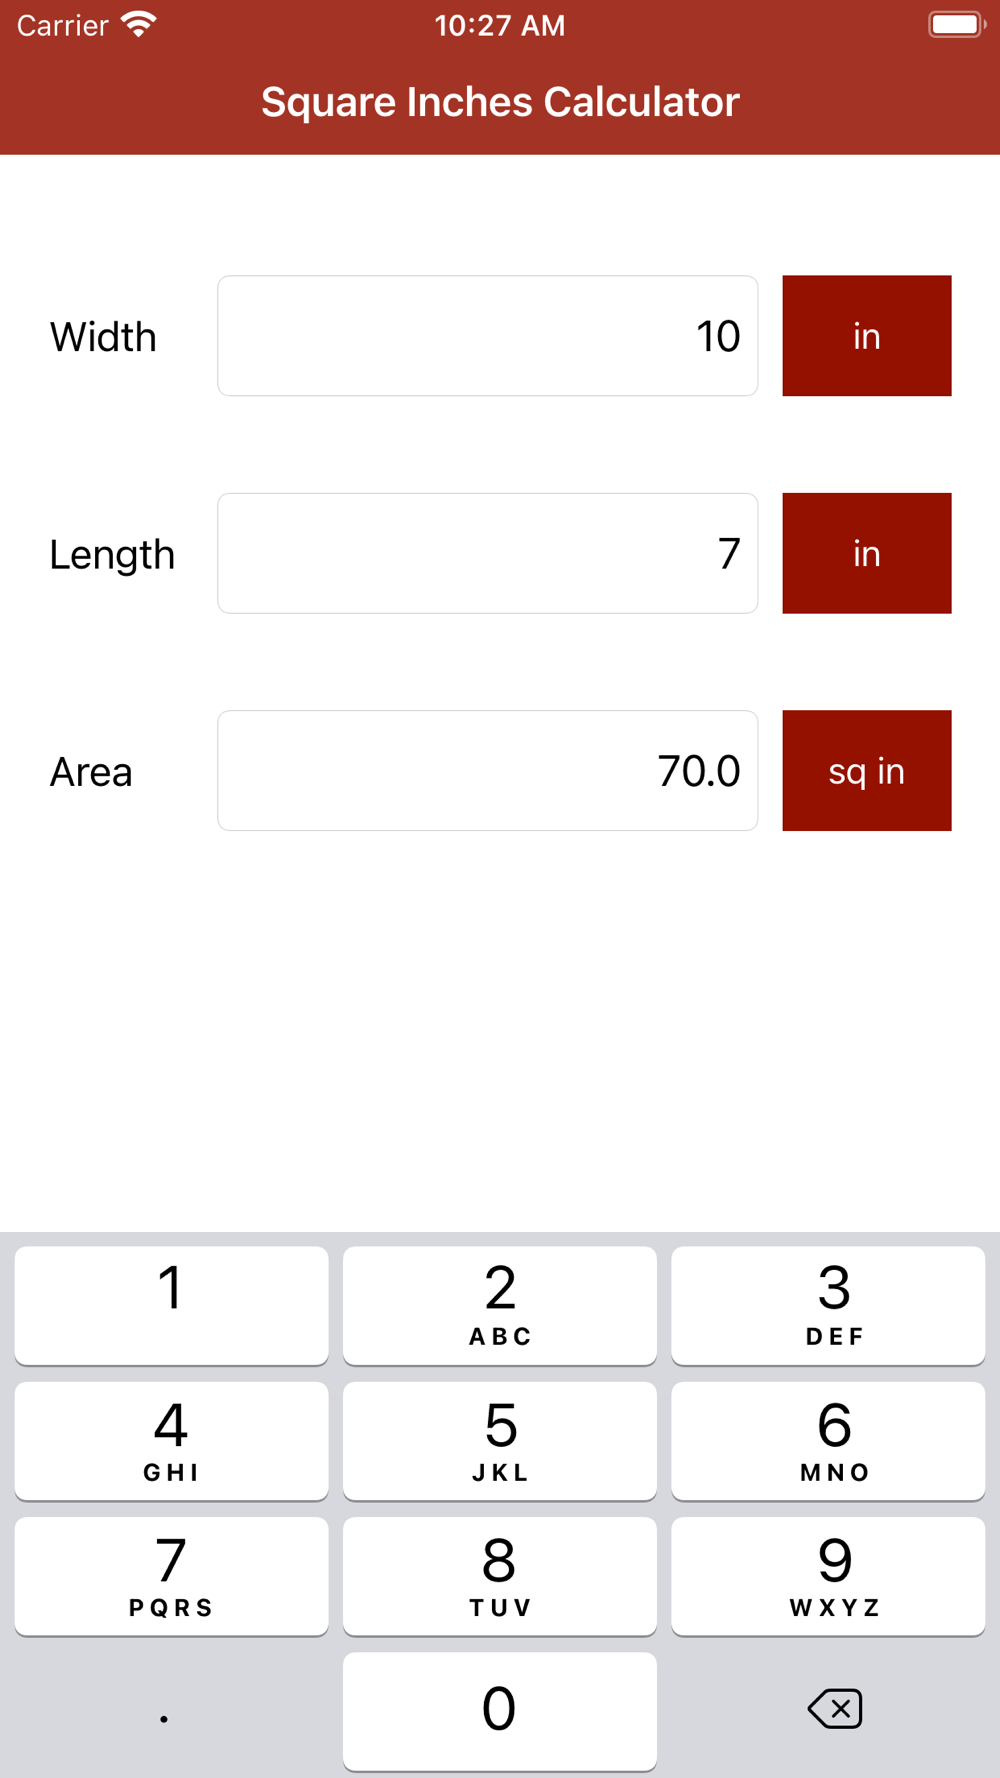 Square Inches Calculator Download App for iPhone - STEPrimo.com